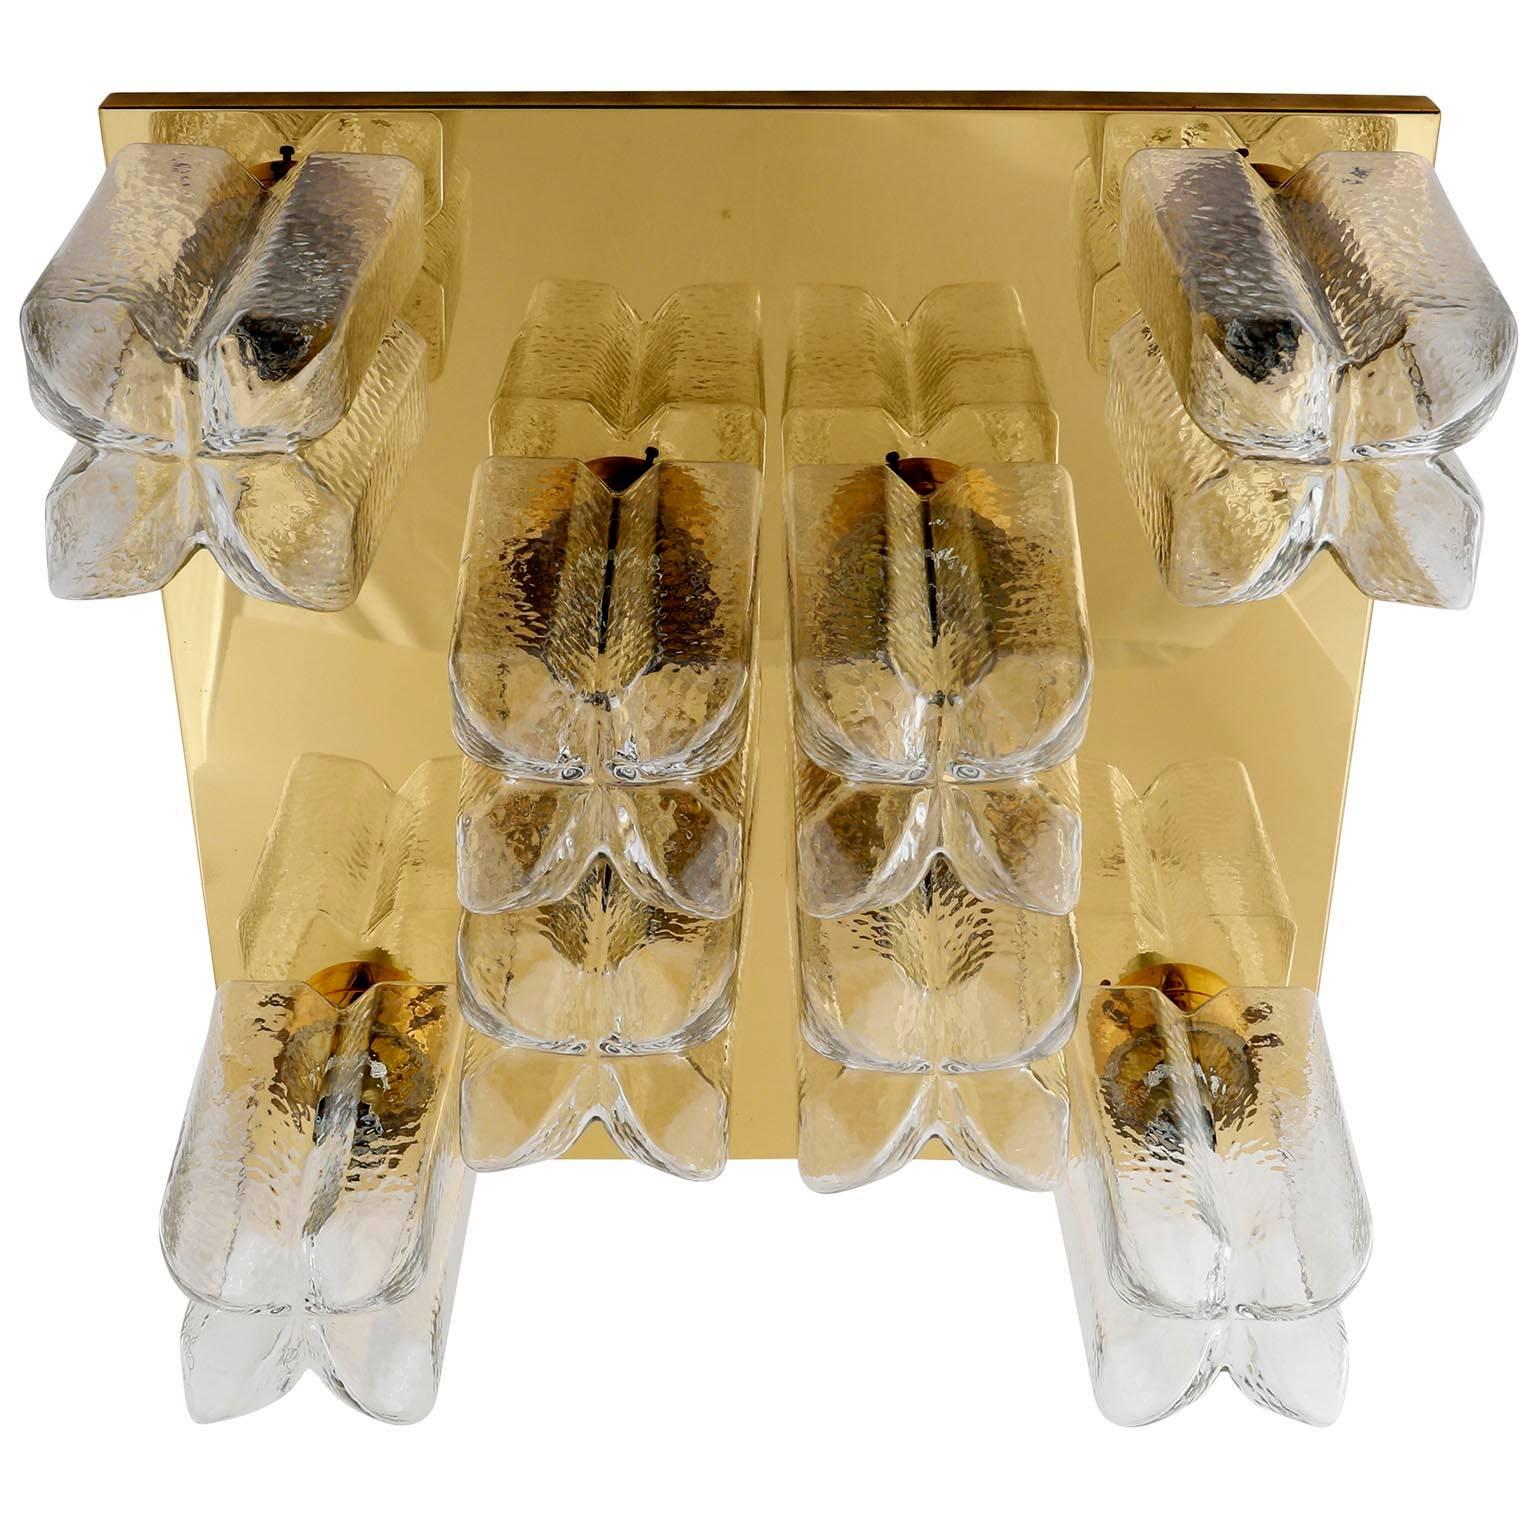 A large and square light fixture by Kalmar, Austria, manufactured in midcentury, circa 1970 (late 1960s or early 1970s).
It is made of polished brass and cast glass. There are eight standard screw base bulbs up to 60W per bulb which are covered